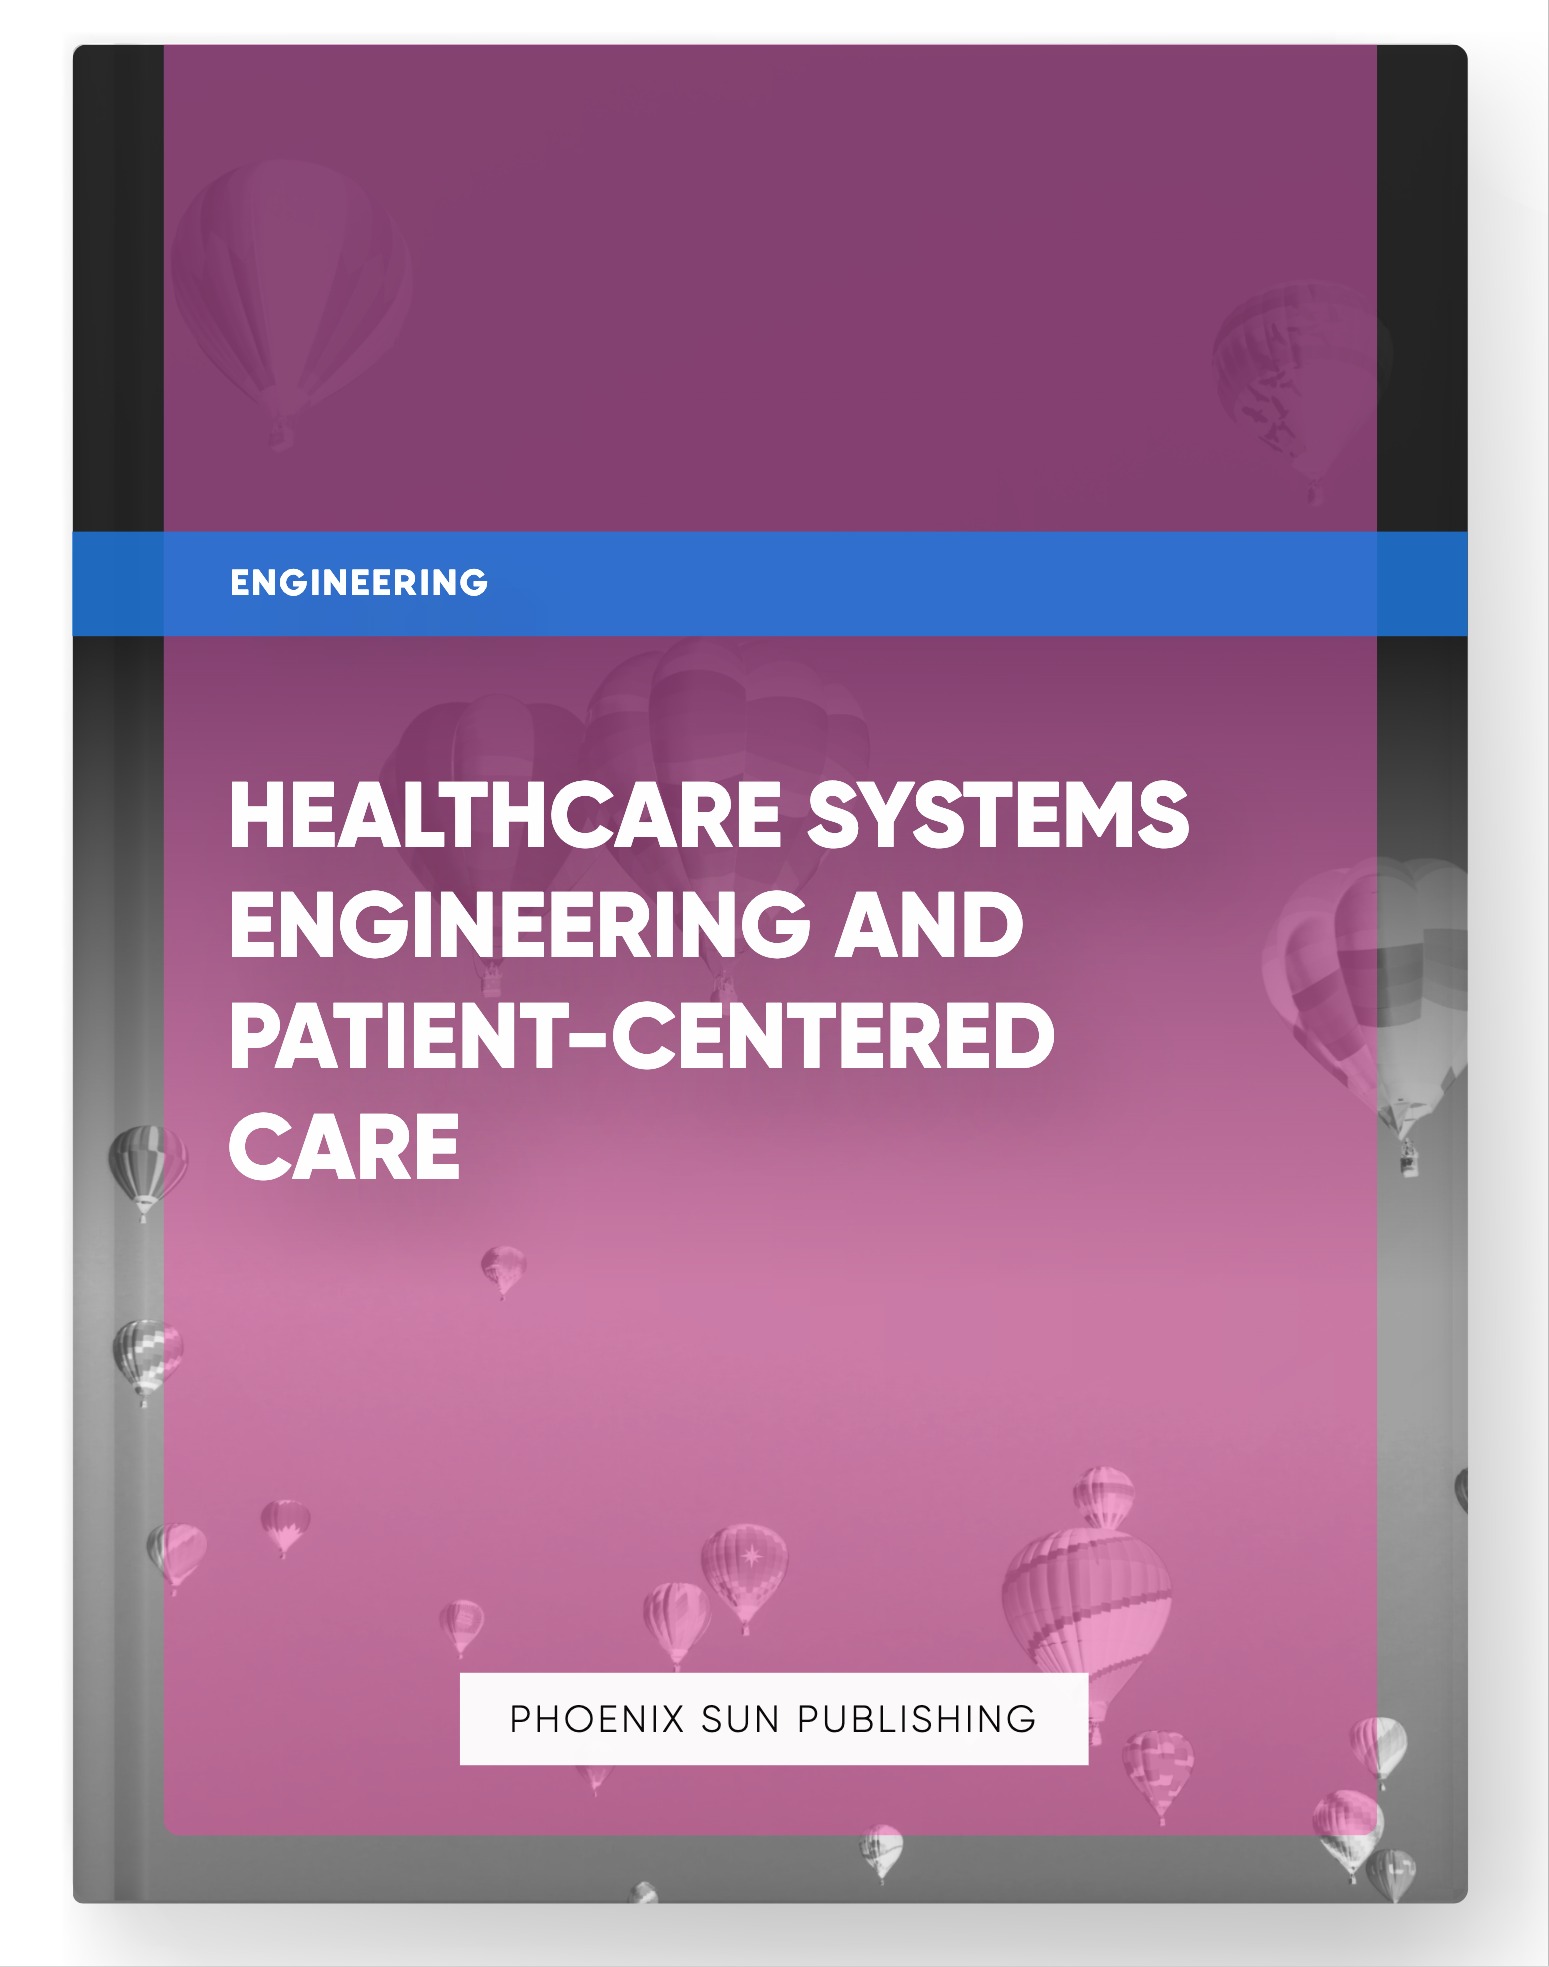 Healthcare Systems Engineering and Patient-Centered Care